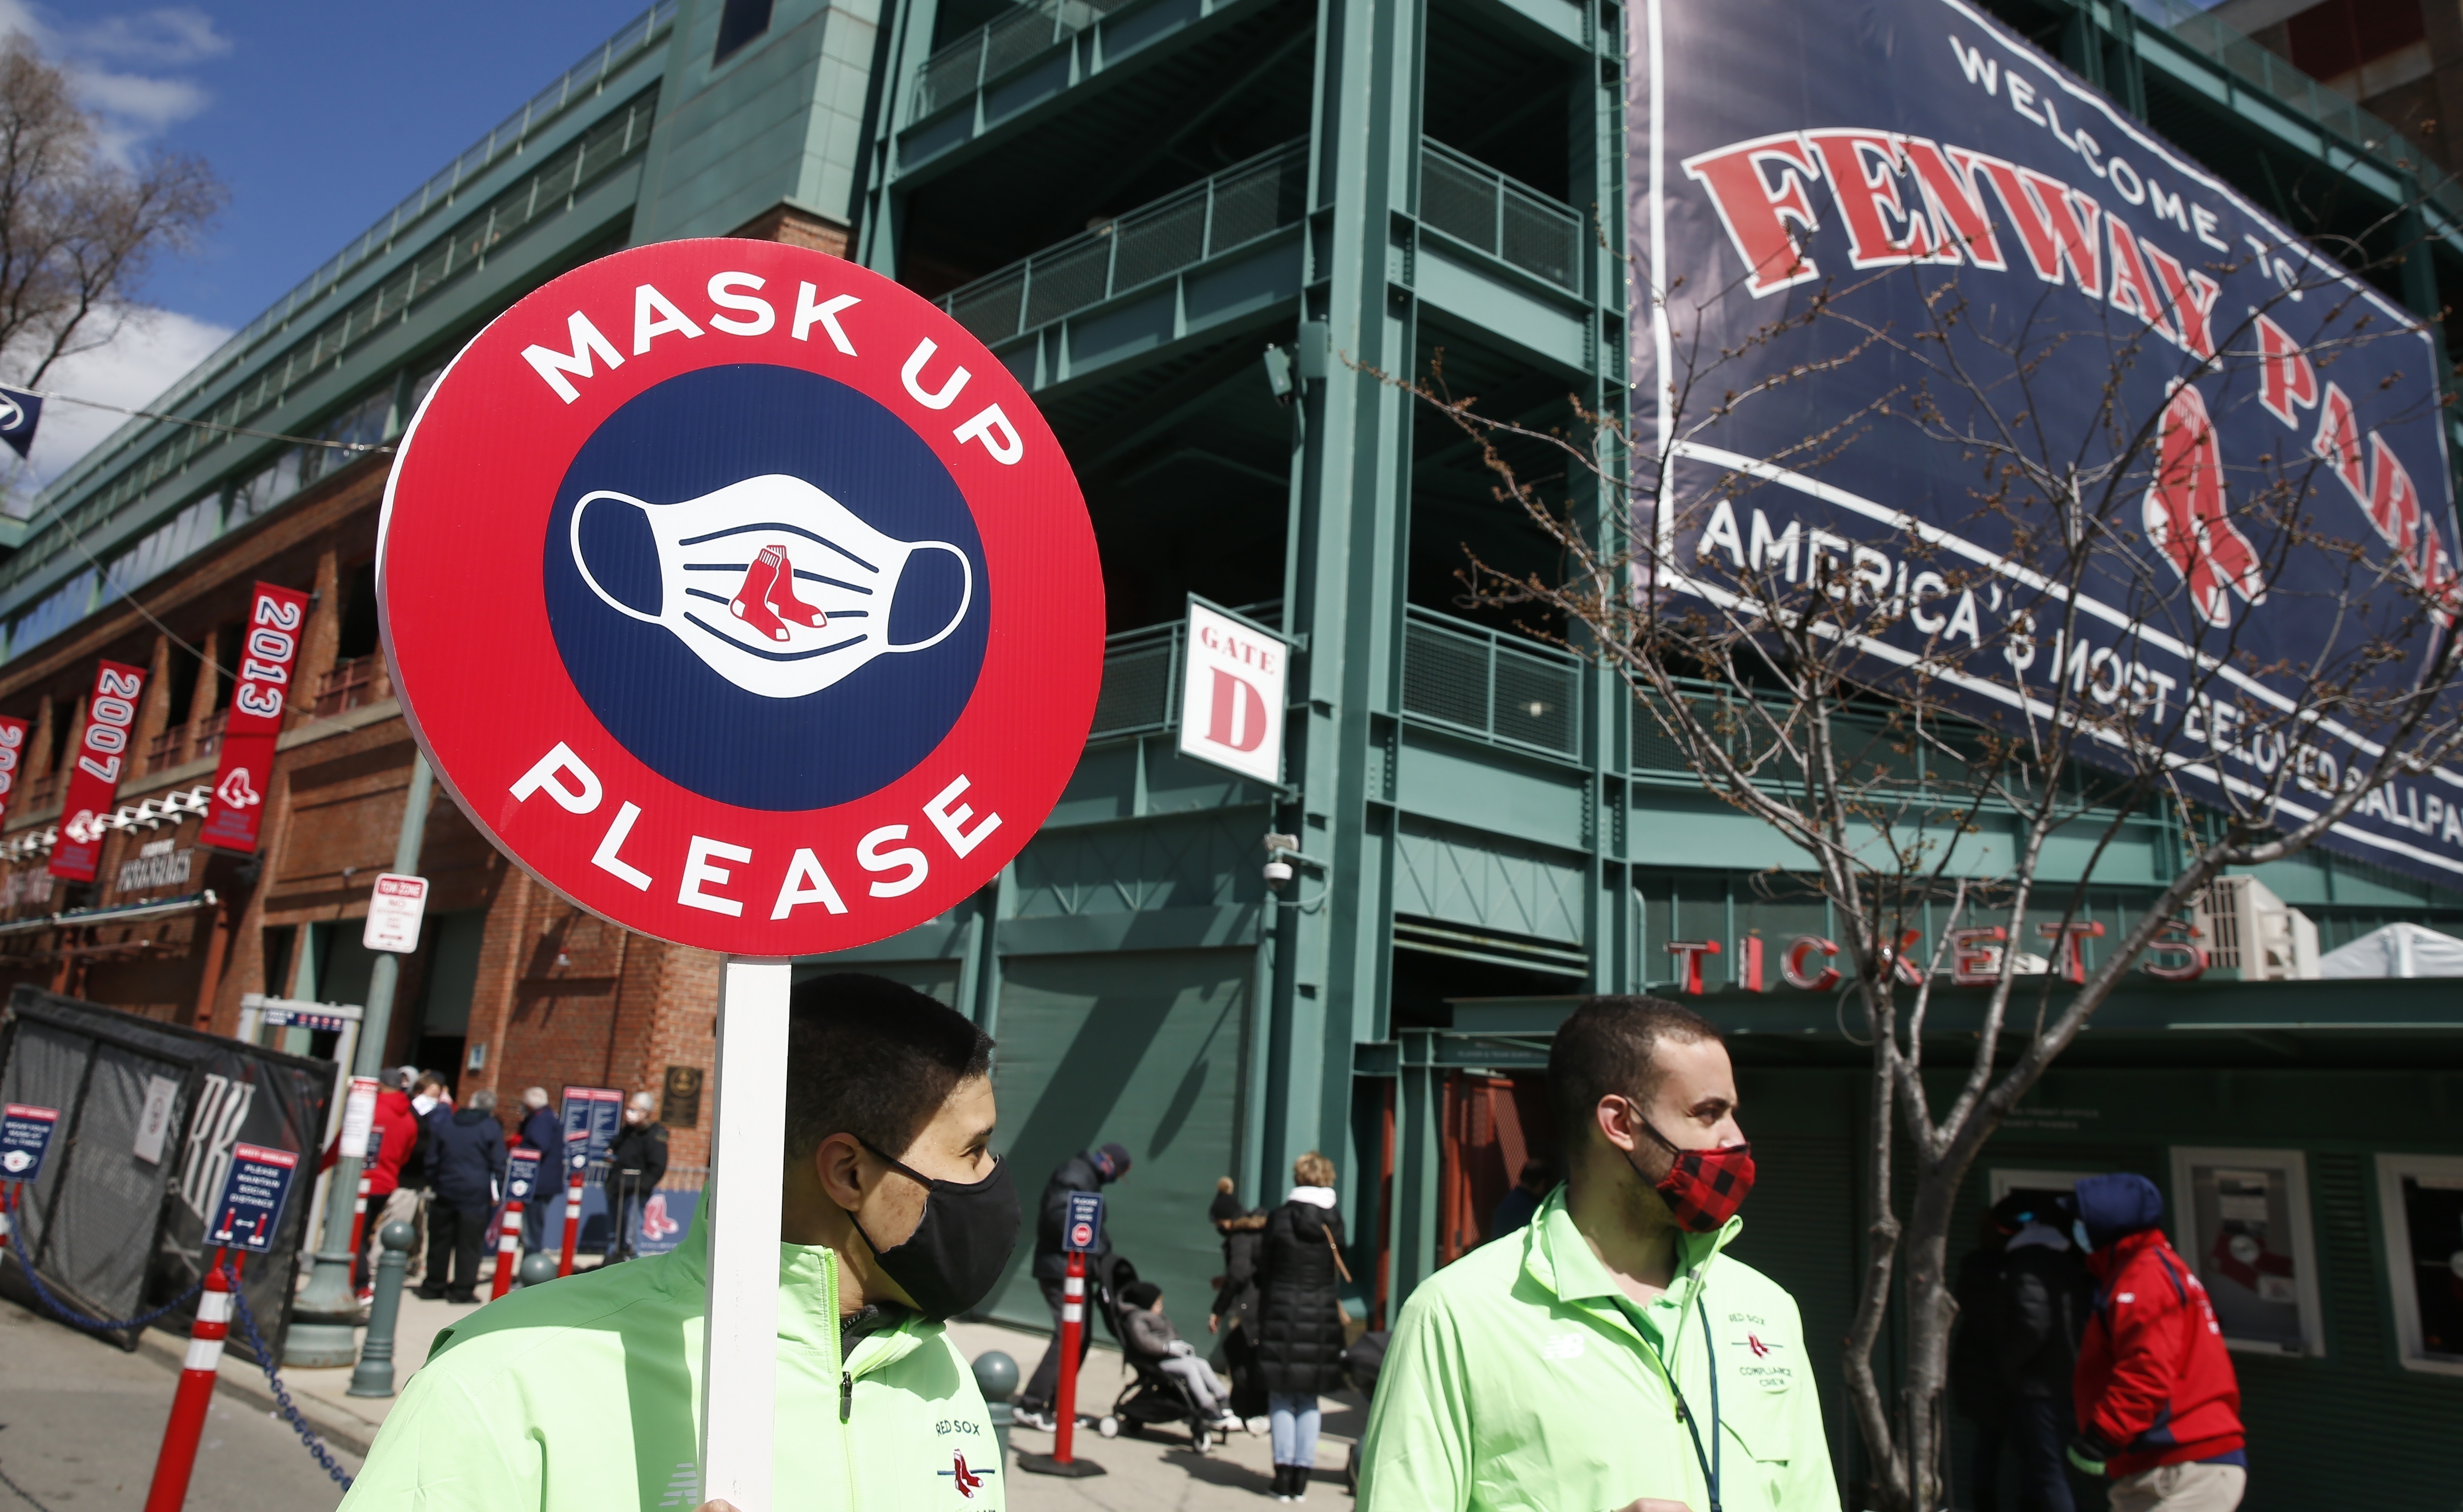 Red Sox unveil 'City Connect' uniforms for Patriots' Day weekend